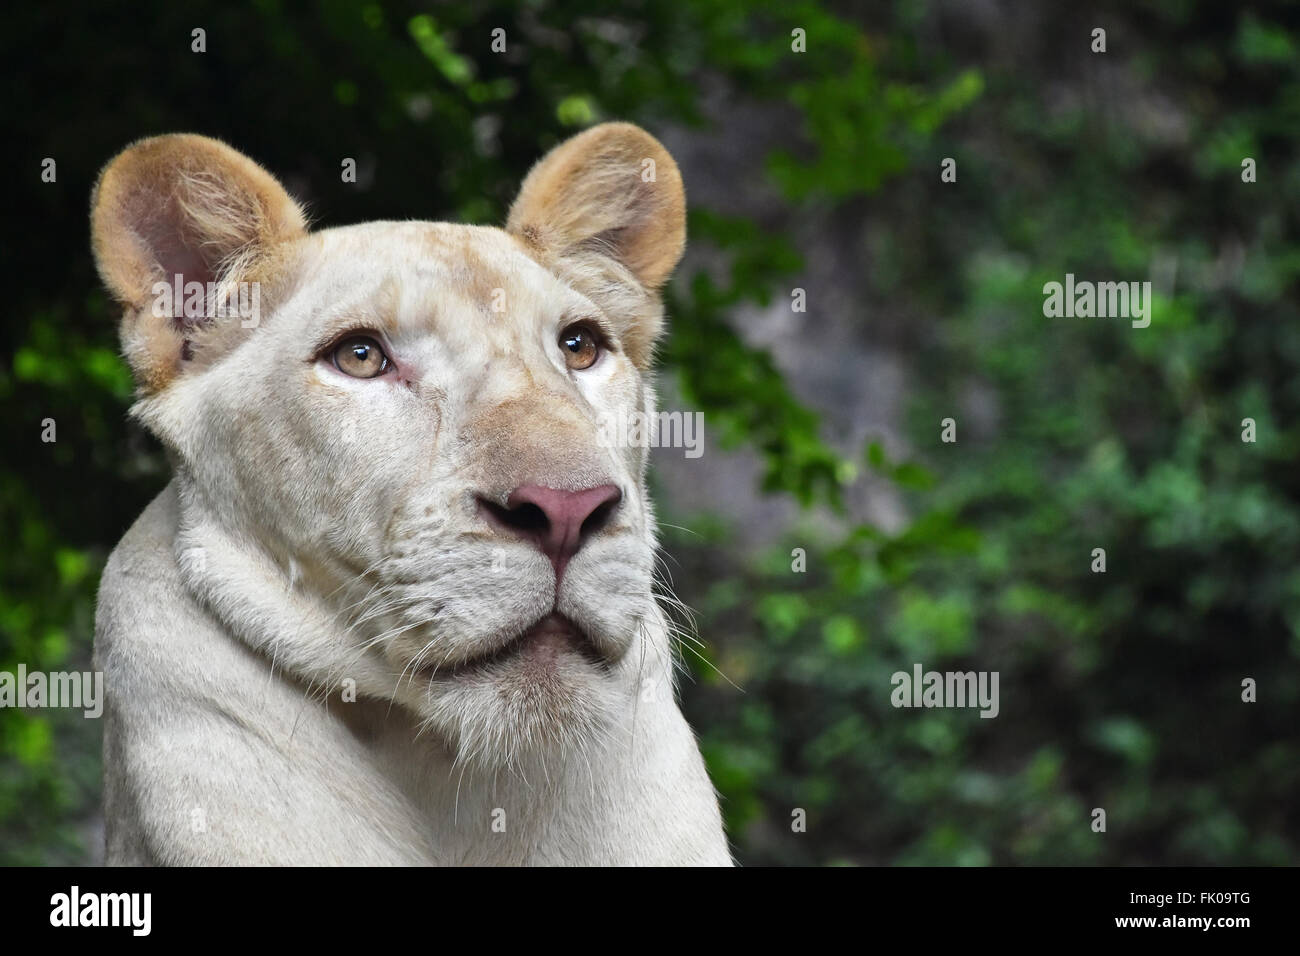 Young white African lioness close up portrait in zoo environment, low angle Stock Photo